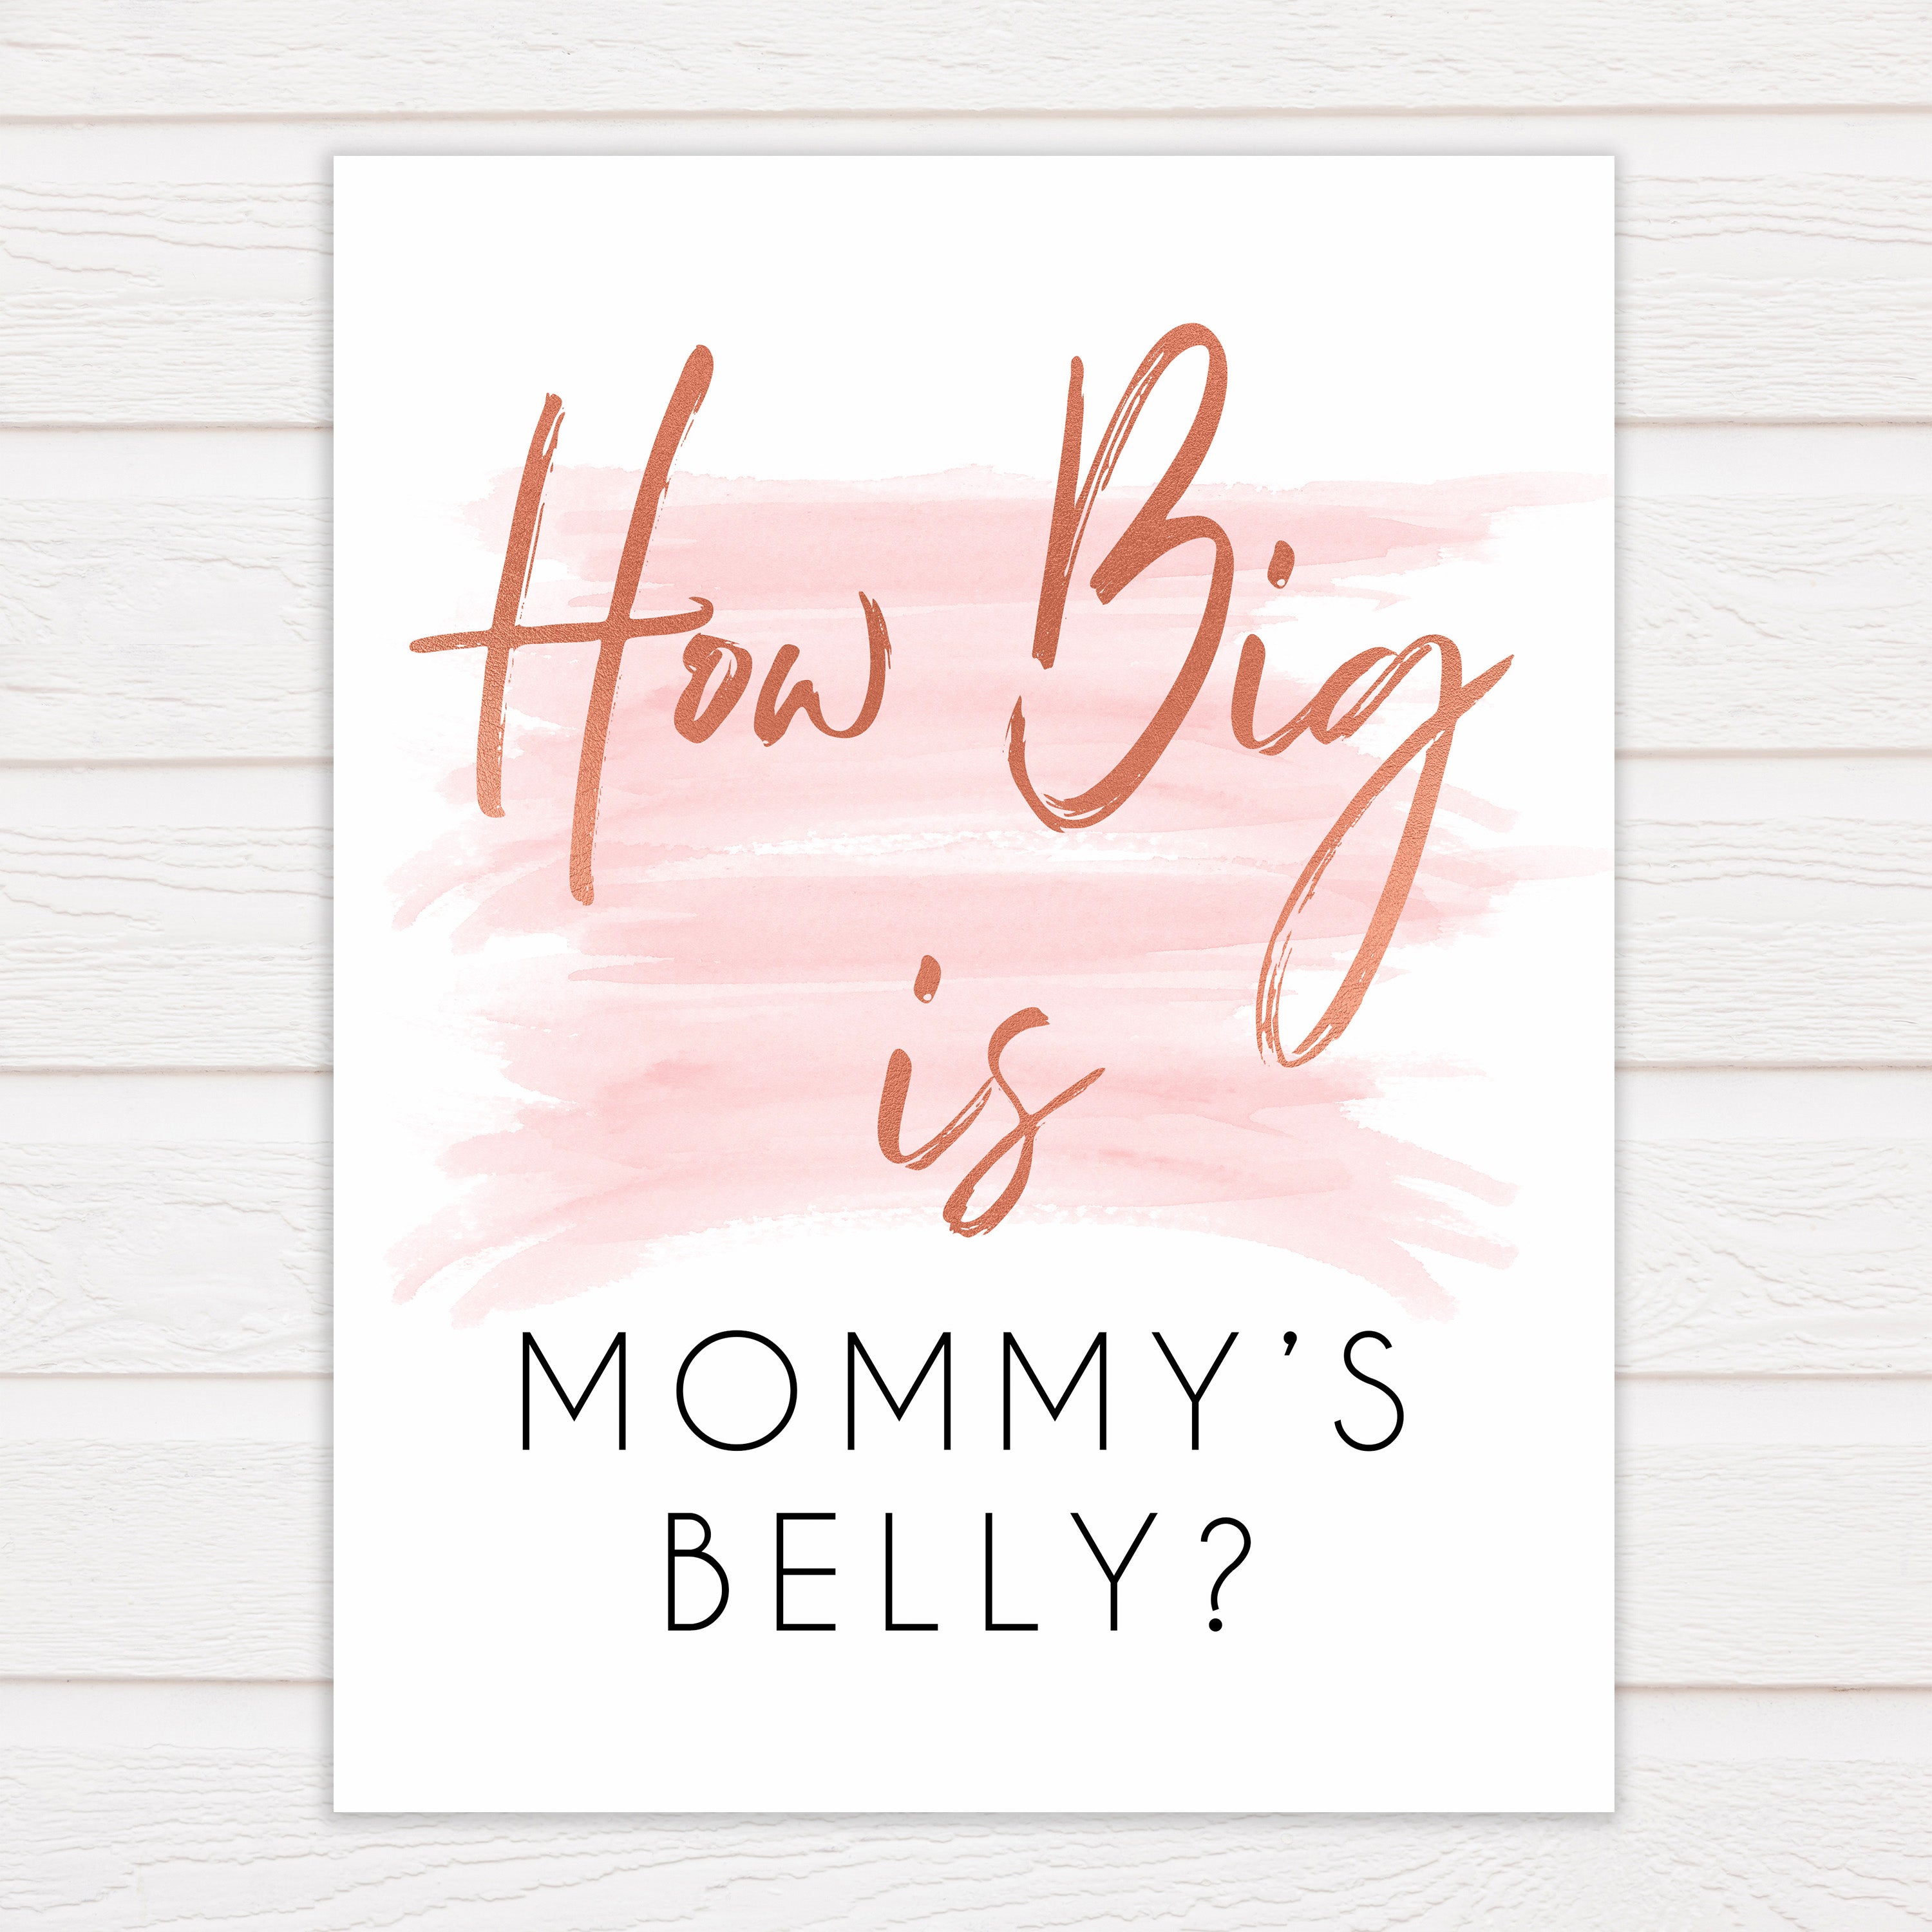 Pink Swash How Big Is Mommy's Belly, Mommys Belly Game, Baby Shower Games, Printable Baby Games, White Guess Mommys Belly, Baby Games, printable baby games, fun baby games, popular baby shower games